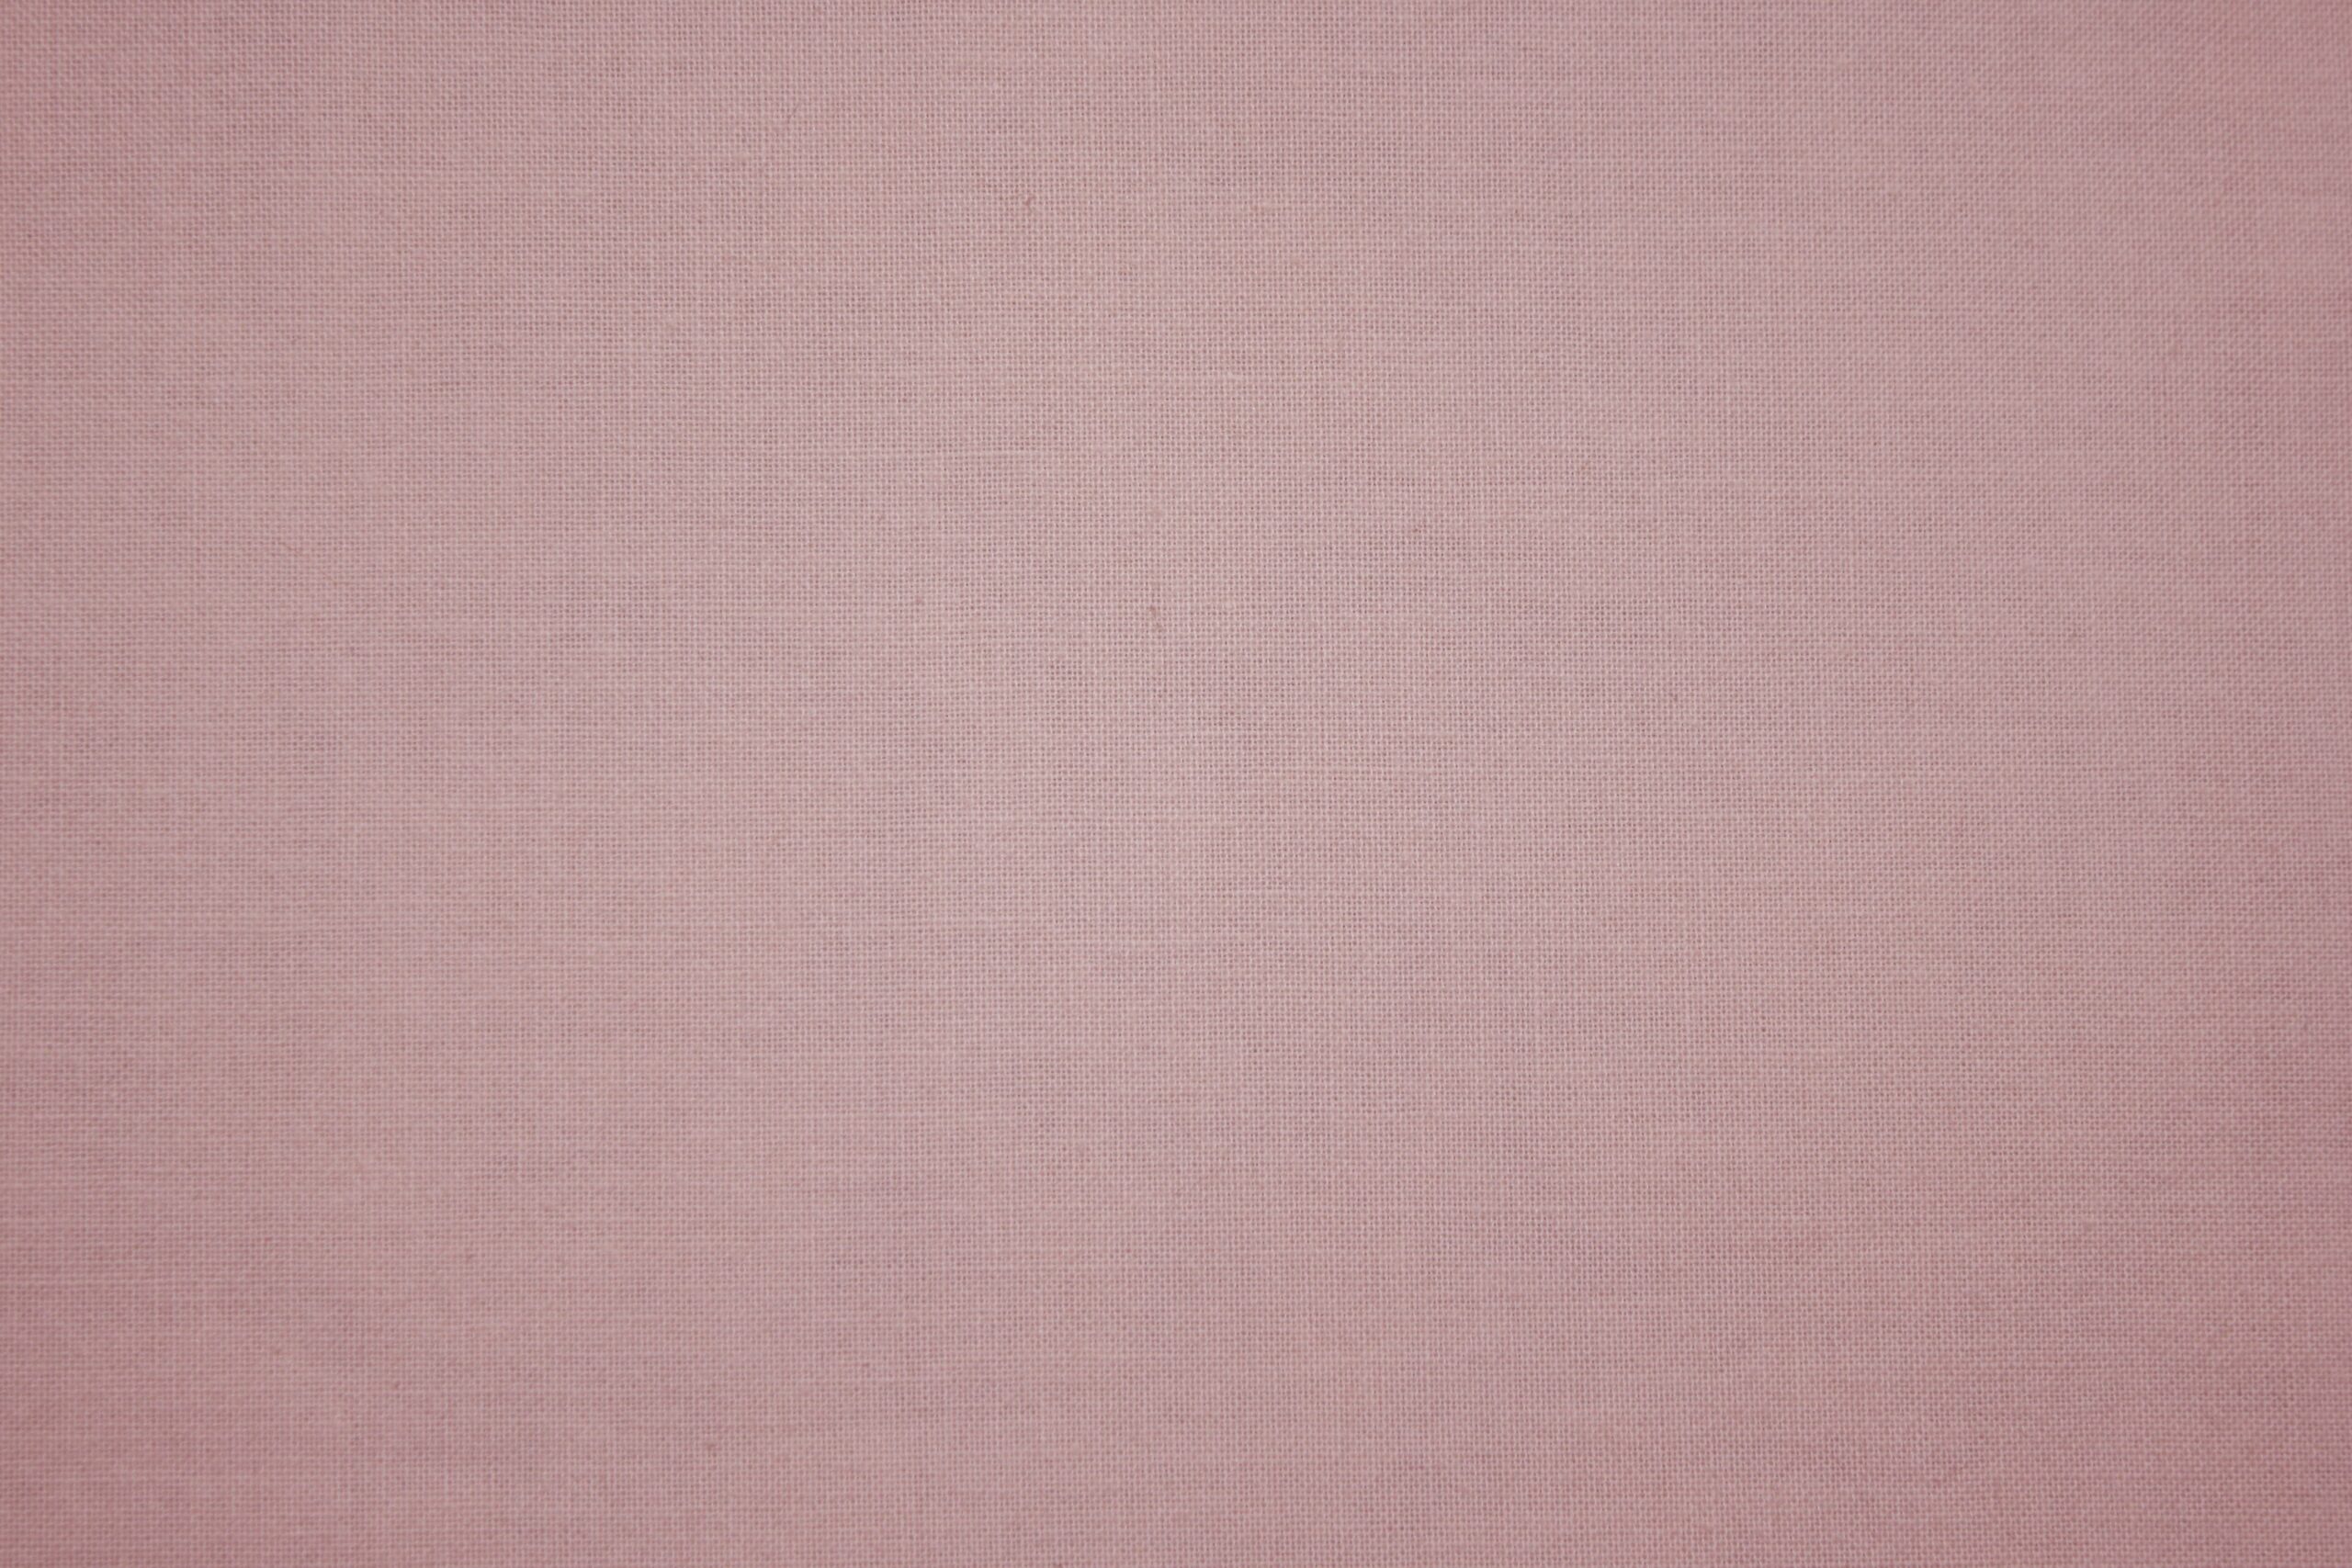 Fabric Cover - Dusty Rose (L)